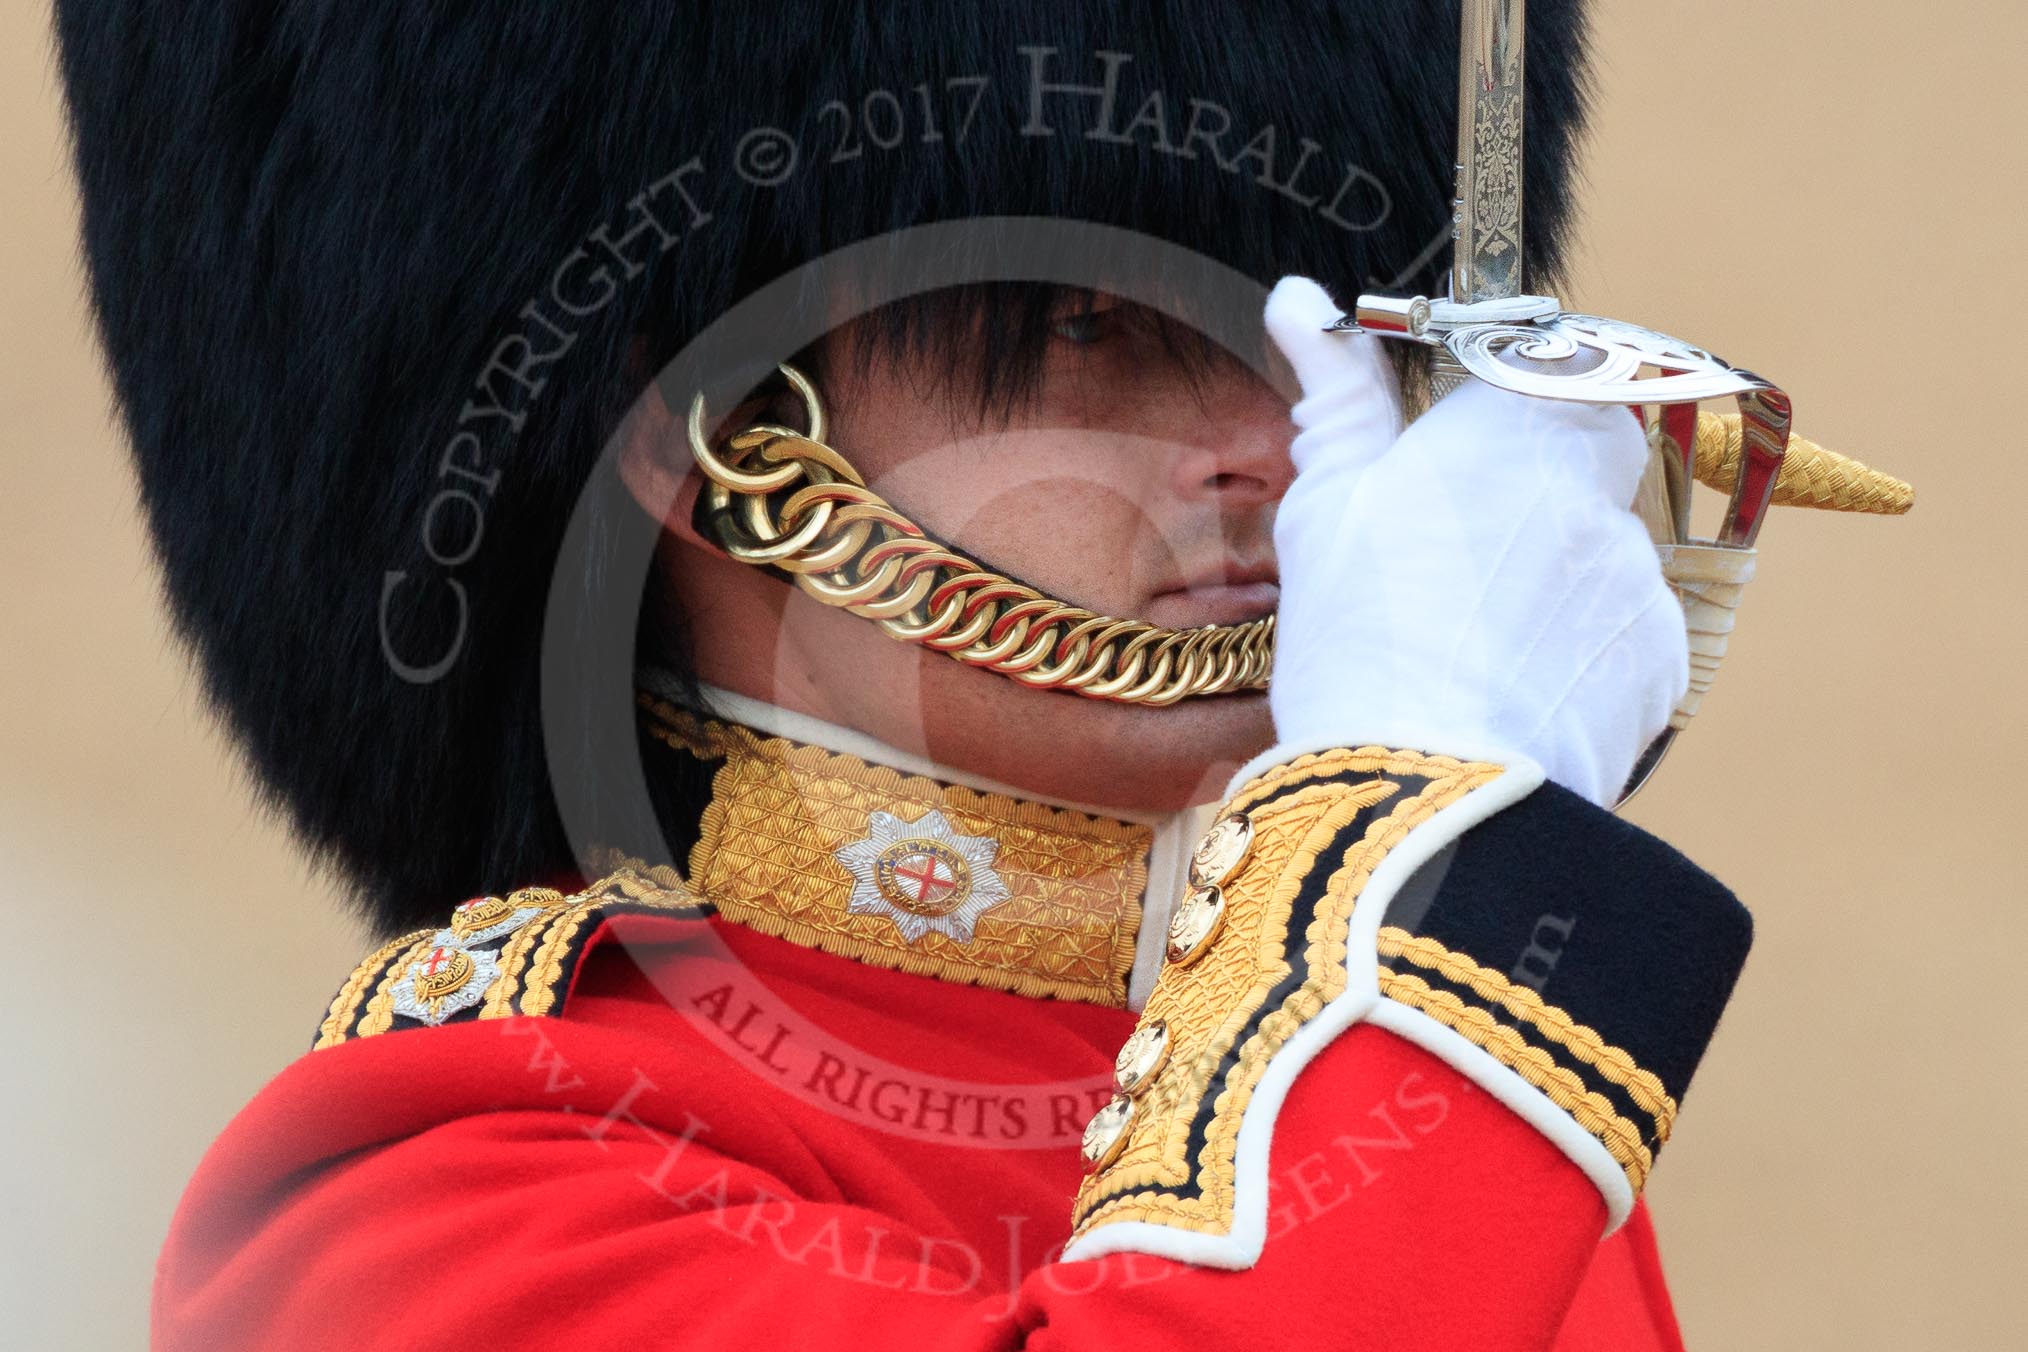 during The Colonel's Review {iptcyear4} (final rehearsal for Trooping the Colour, The Queen's Birthday Parade)  at Horse Guards Parade, Westminster, London, 2 June 2018, 10:33.